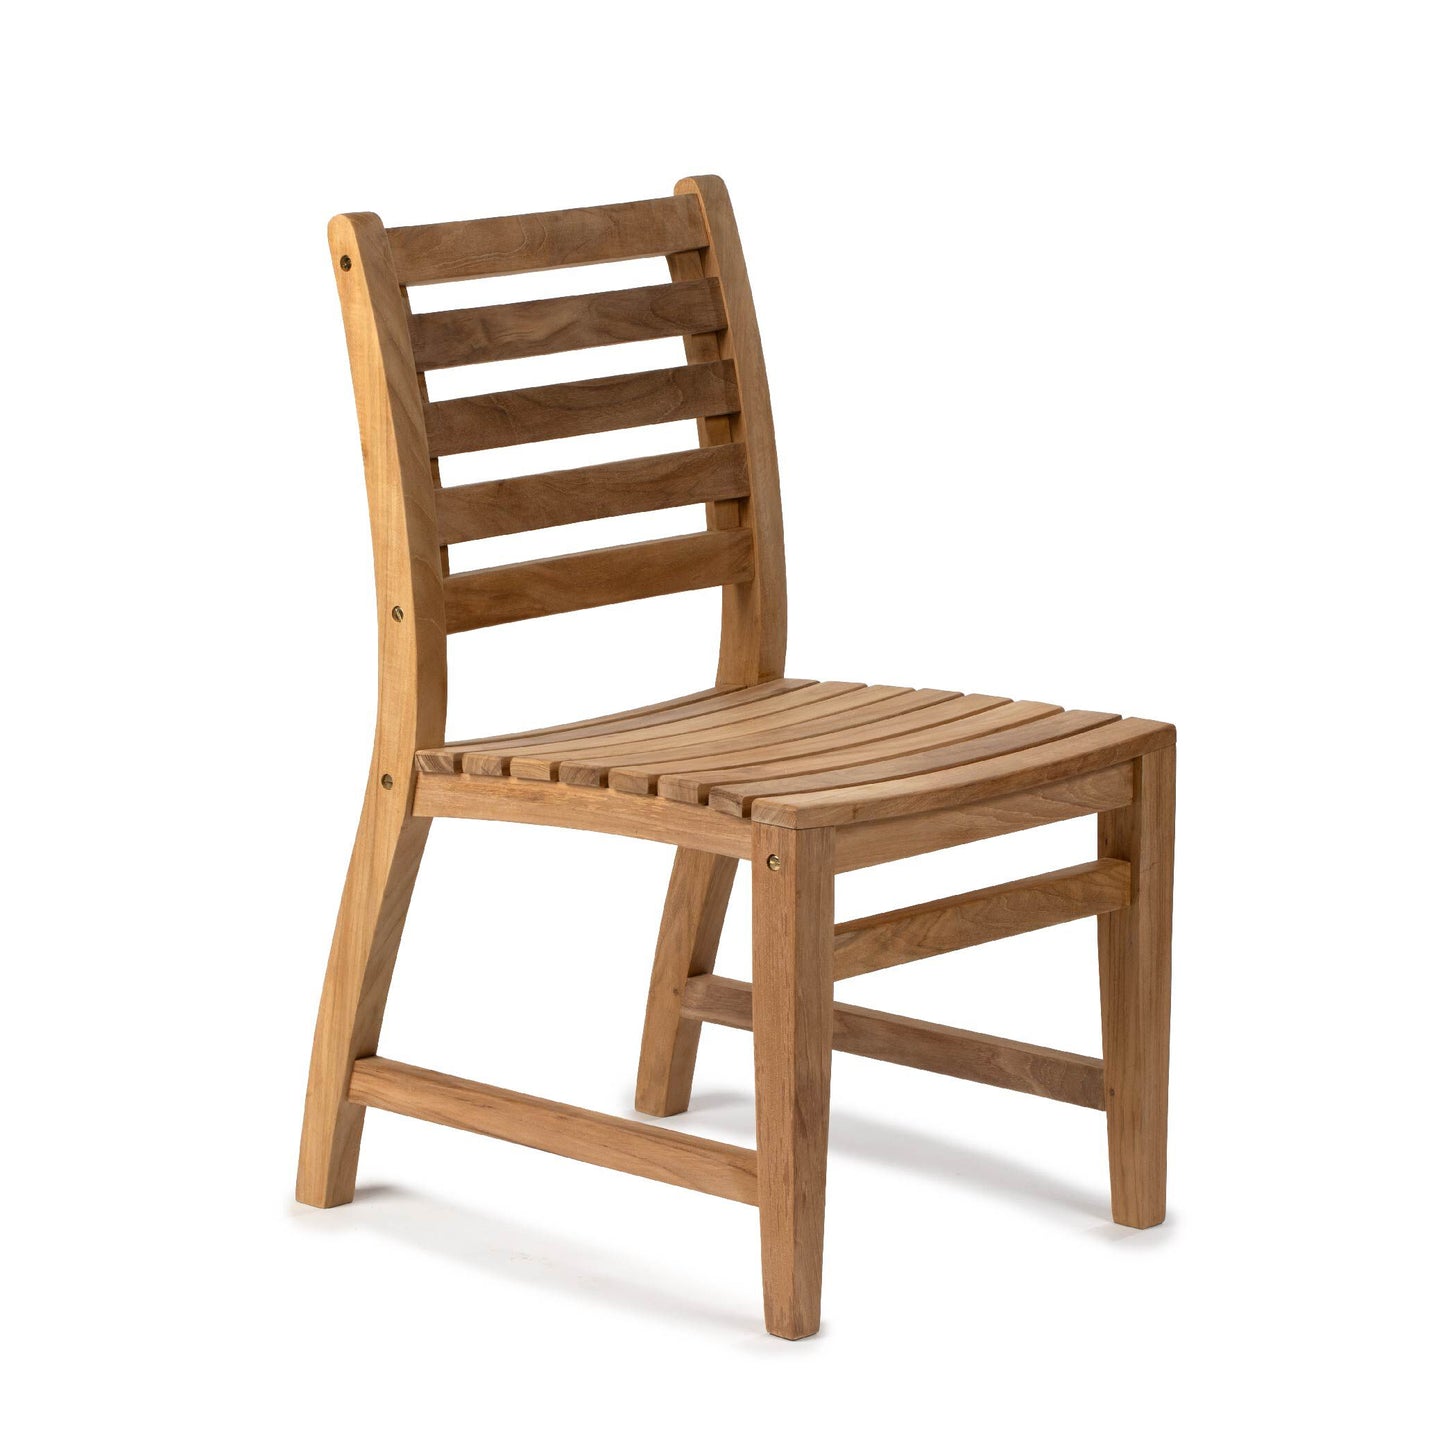 Sandhill Grade A Teak Dining Chair with Optional Arms - Optional Arms: No Arms | No Arms - view 1